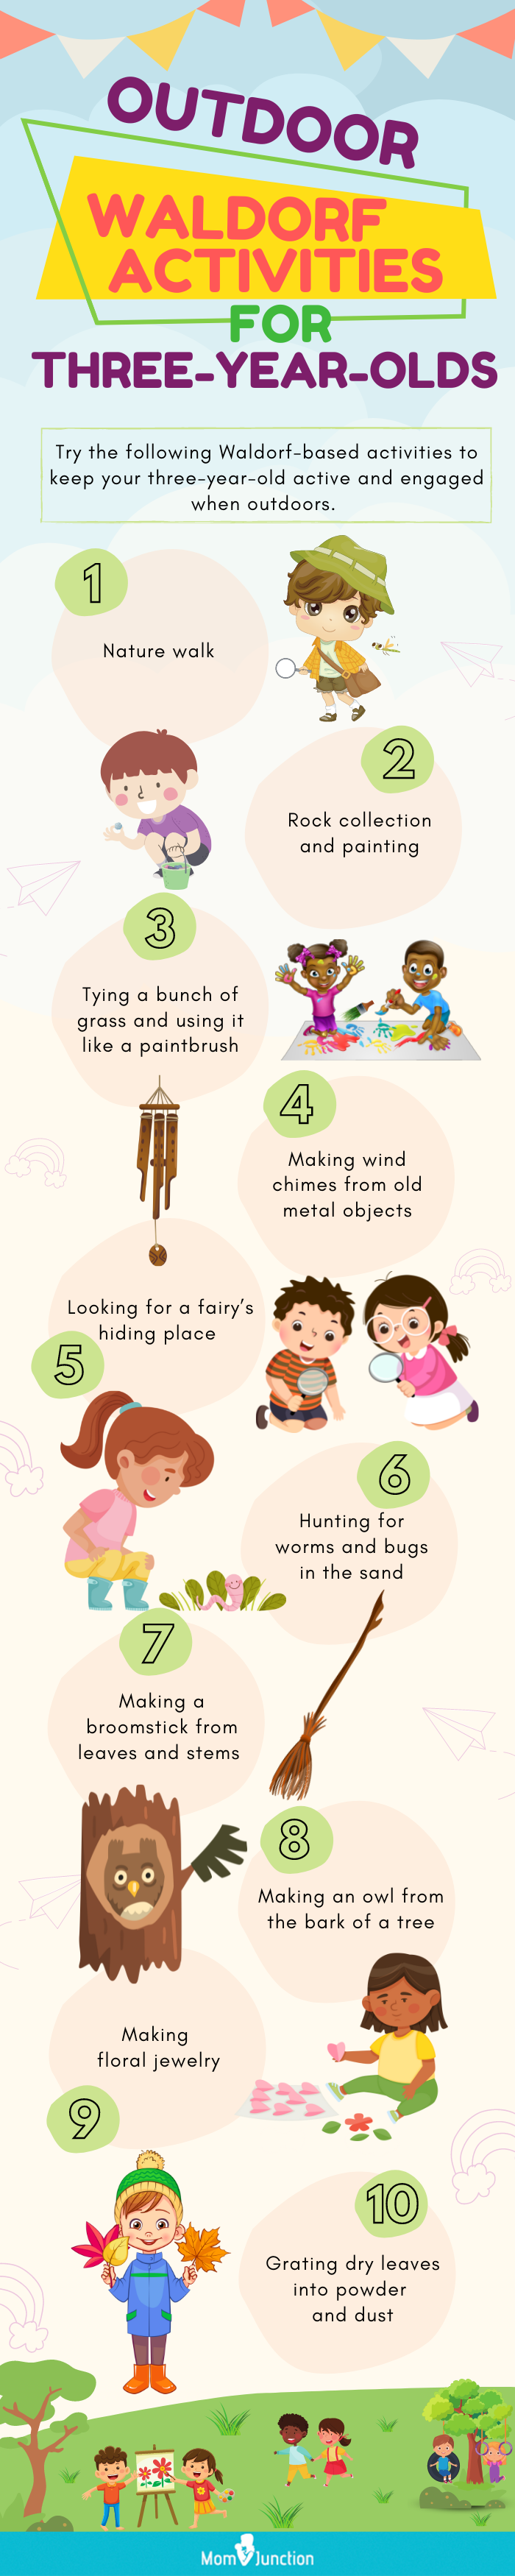 https://www.momjunction.com/wp-content/uploads/2020/10/Outdoor-Waldorf-Activities-For-Three-Year-Olds-4.png